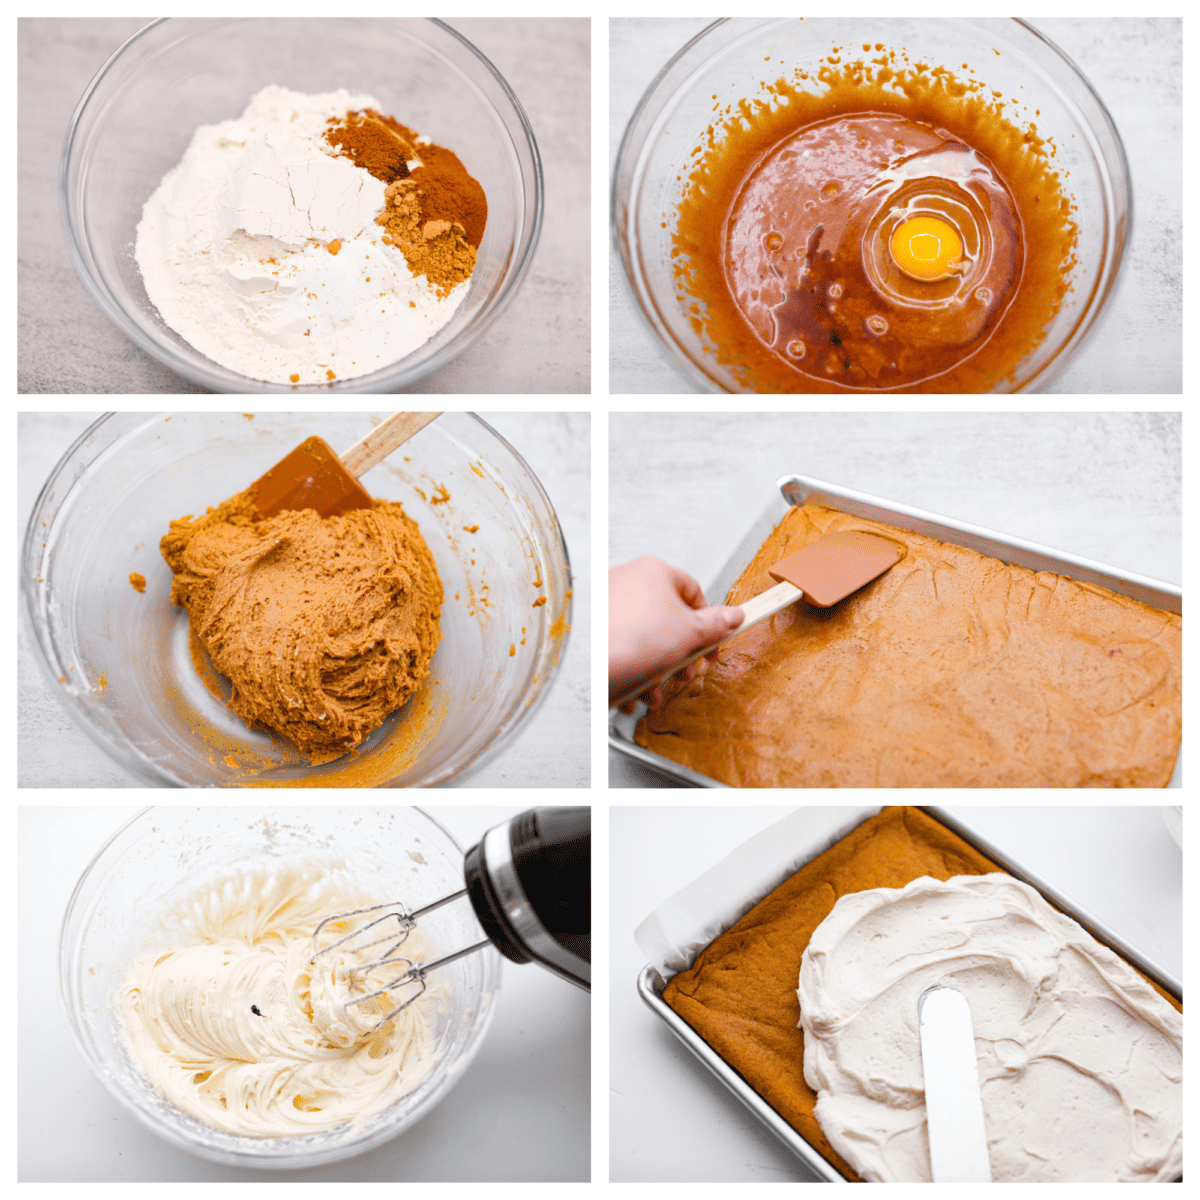 First photo of dry ingredients added to a bowl. Second photo of wet ingredients added to a bowl. Third photo of the dough mixed together in a bowl. Fourth photo of the dough pressed into a pan. Fifth photo of the frosting mixed in a bowl. Sixth photo of the bars being frosted.